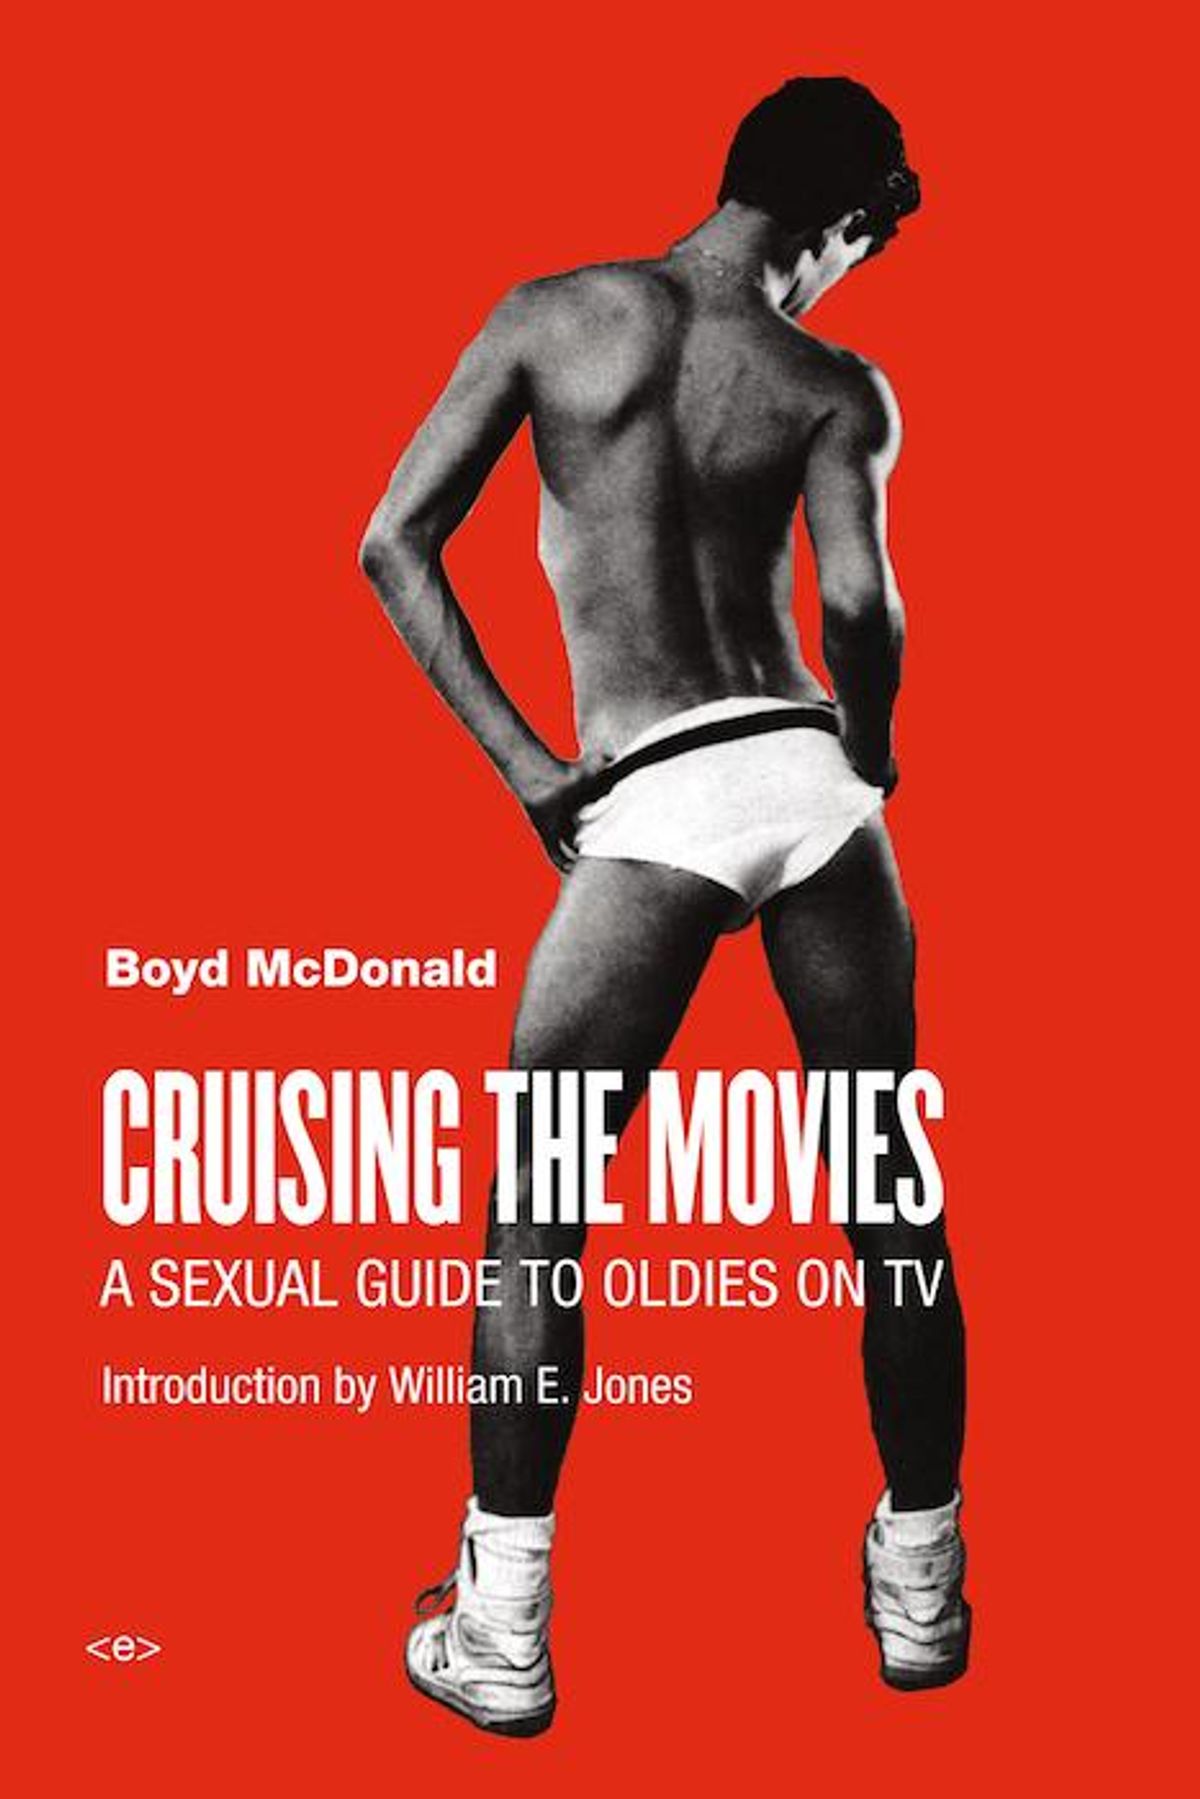 Boyd McDonald’s Cruising the Movies: A Sexual Guide to Oldies on TV